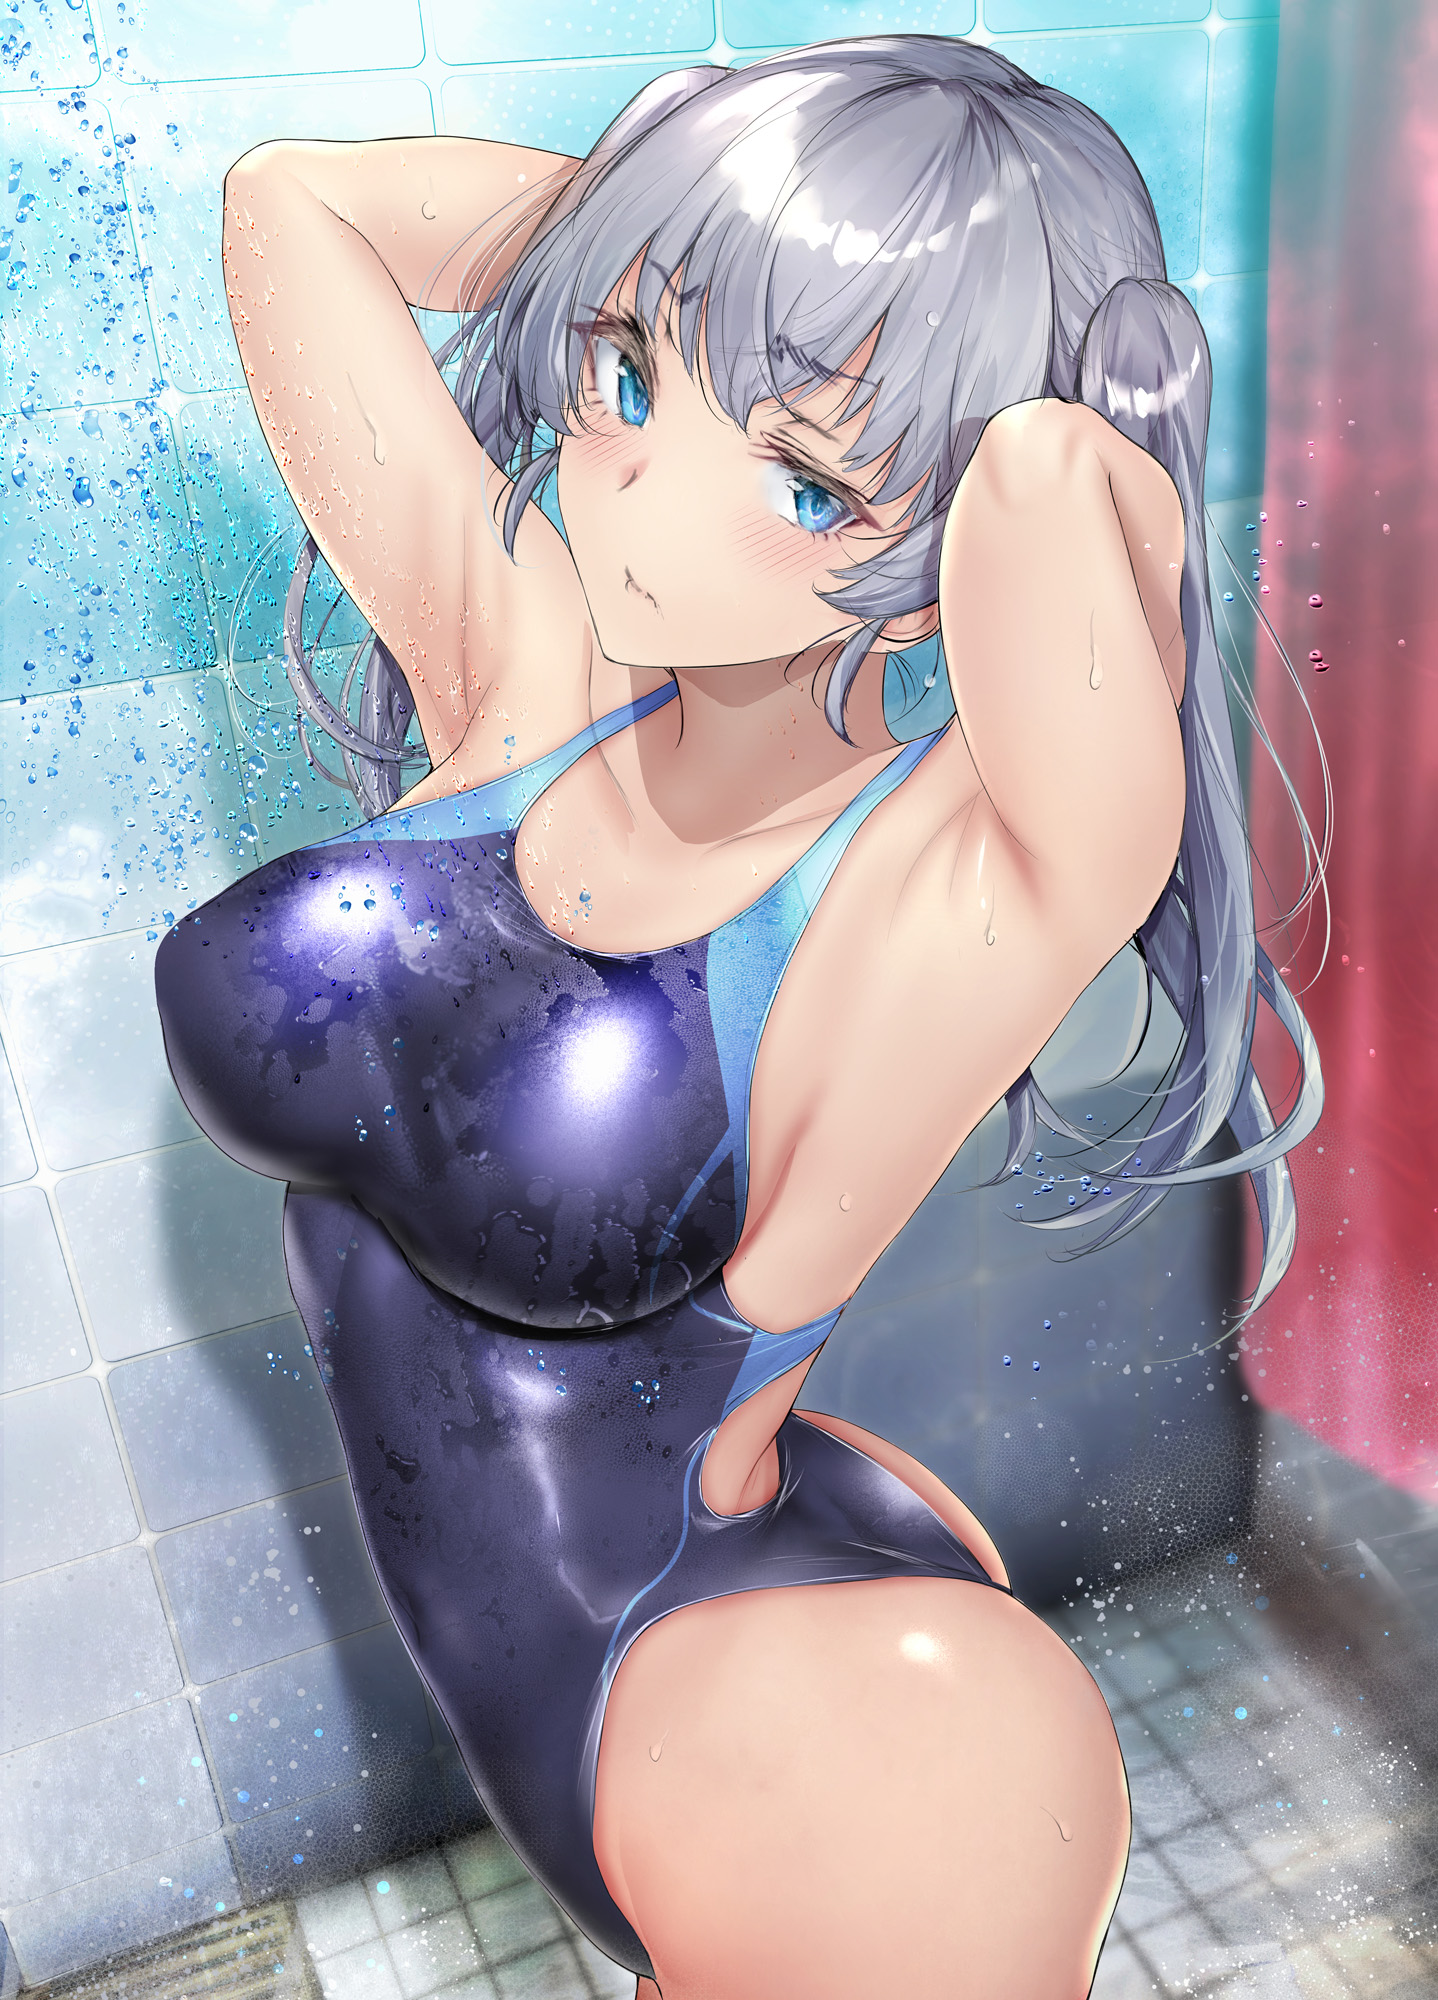 Anime 1438x2000 anime anime girls armpits big boobs silver hair blue eyes wet body water drops ass tight clothing one-piece swimsuit swimwear twintails thighs boob pockets long hair blushing portrait display shower women in shower arms up arm(s) behind head Gentsuki artwork